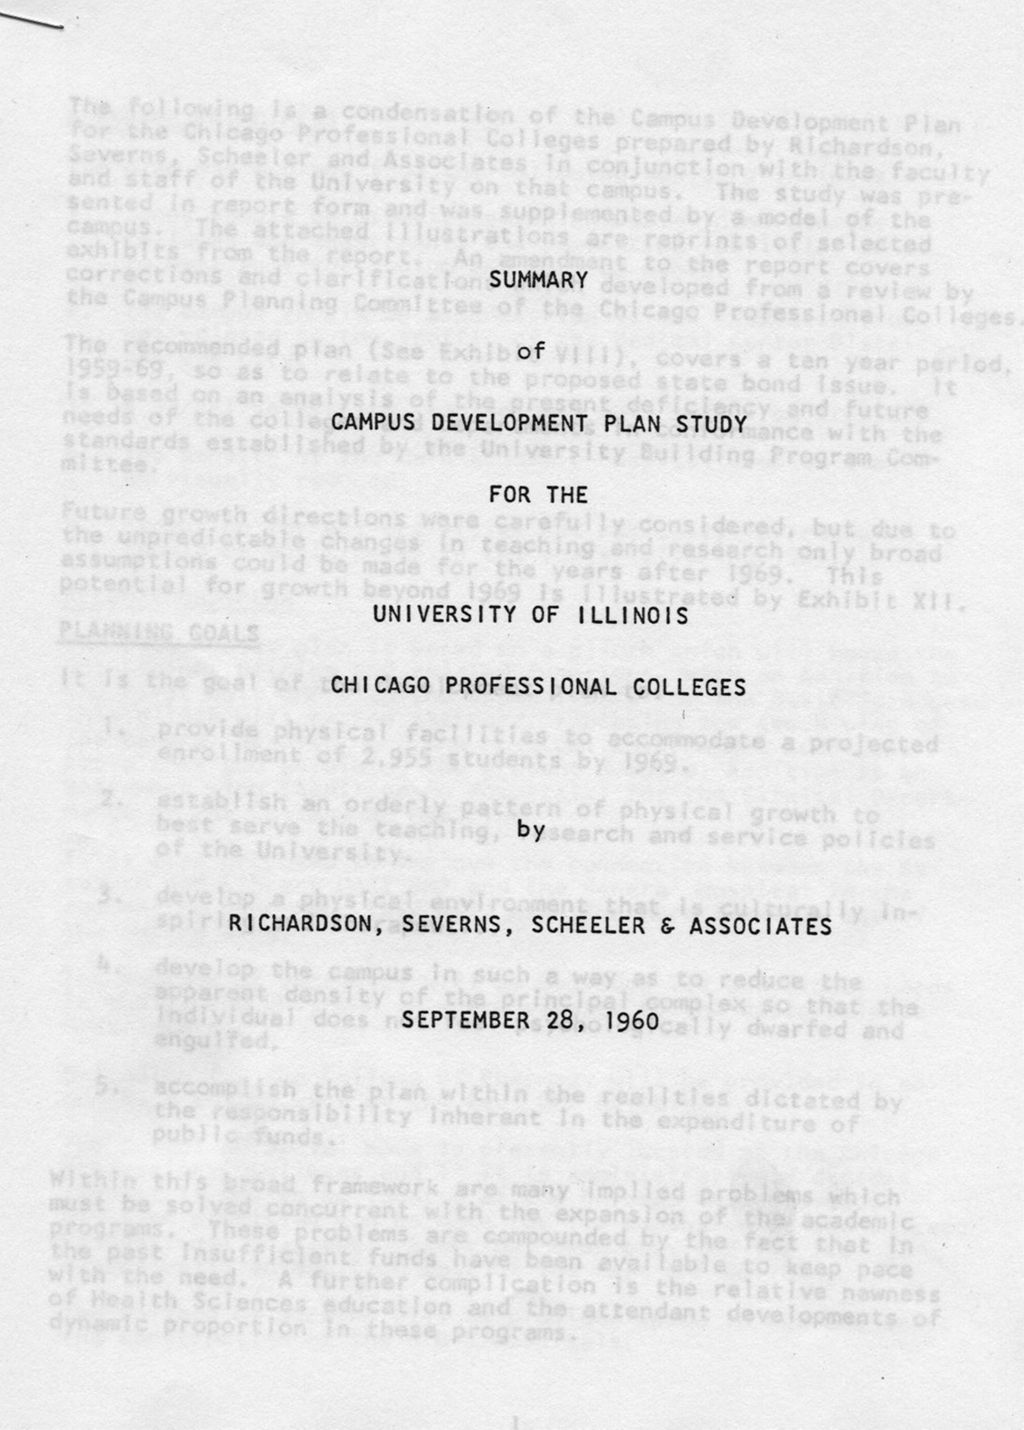 Miniature of Summary of Campus Development Plan Study for the Chicago Professional Colleges, University of Illinois